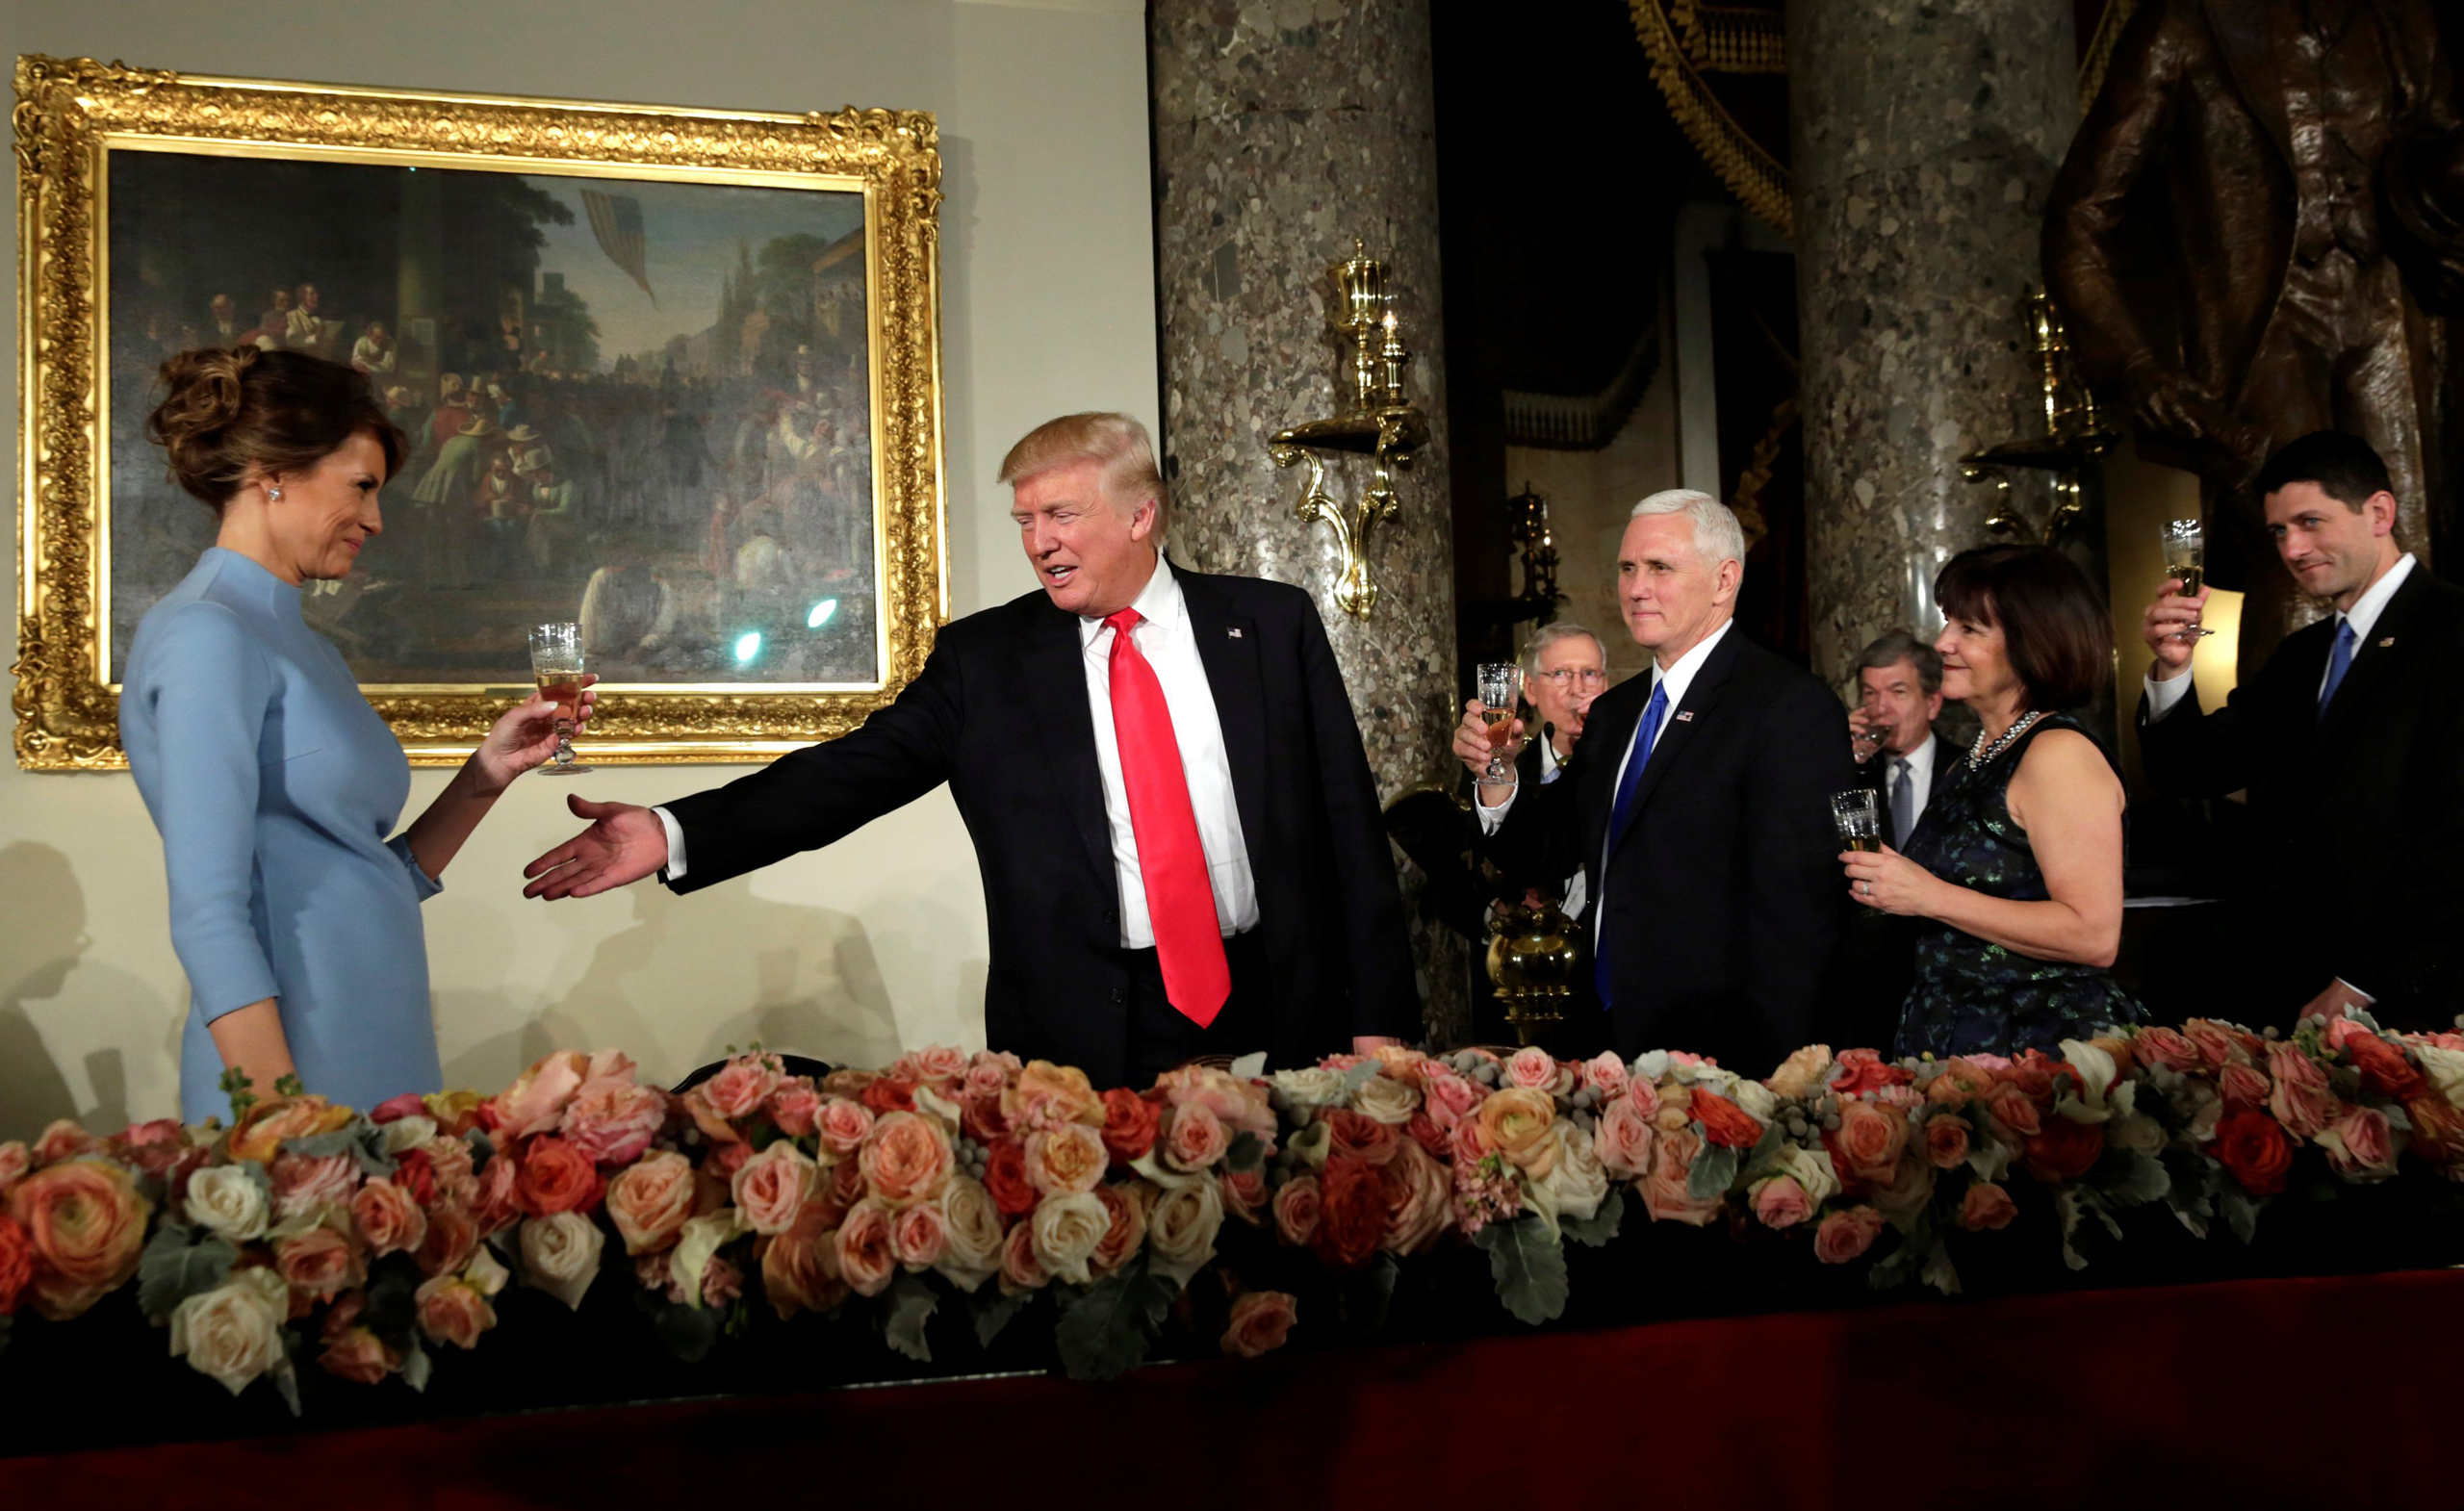 President Donald Trump gestures during a toast at the Inaugural luncheon at the National Statuary Hall in Washington on Jan. 20, 2017. (Yuri Gripas—Reuters)